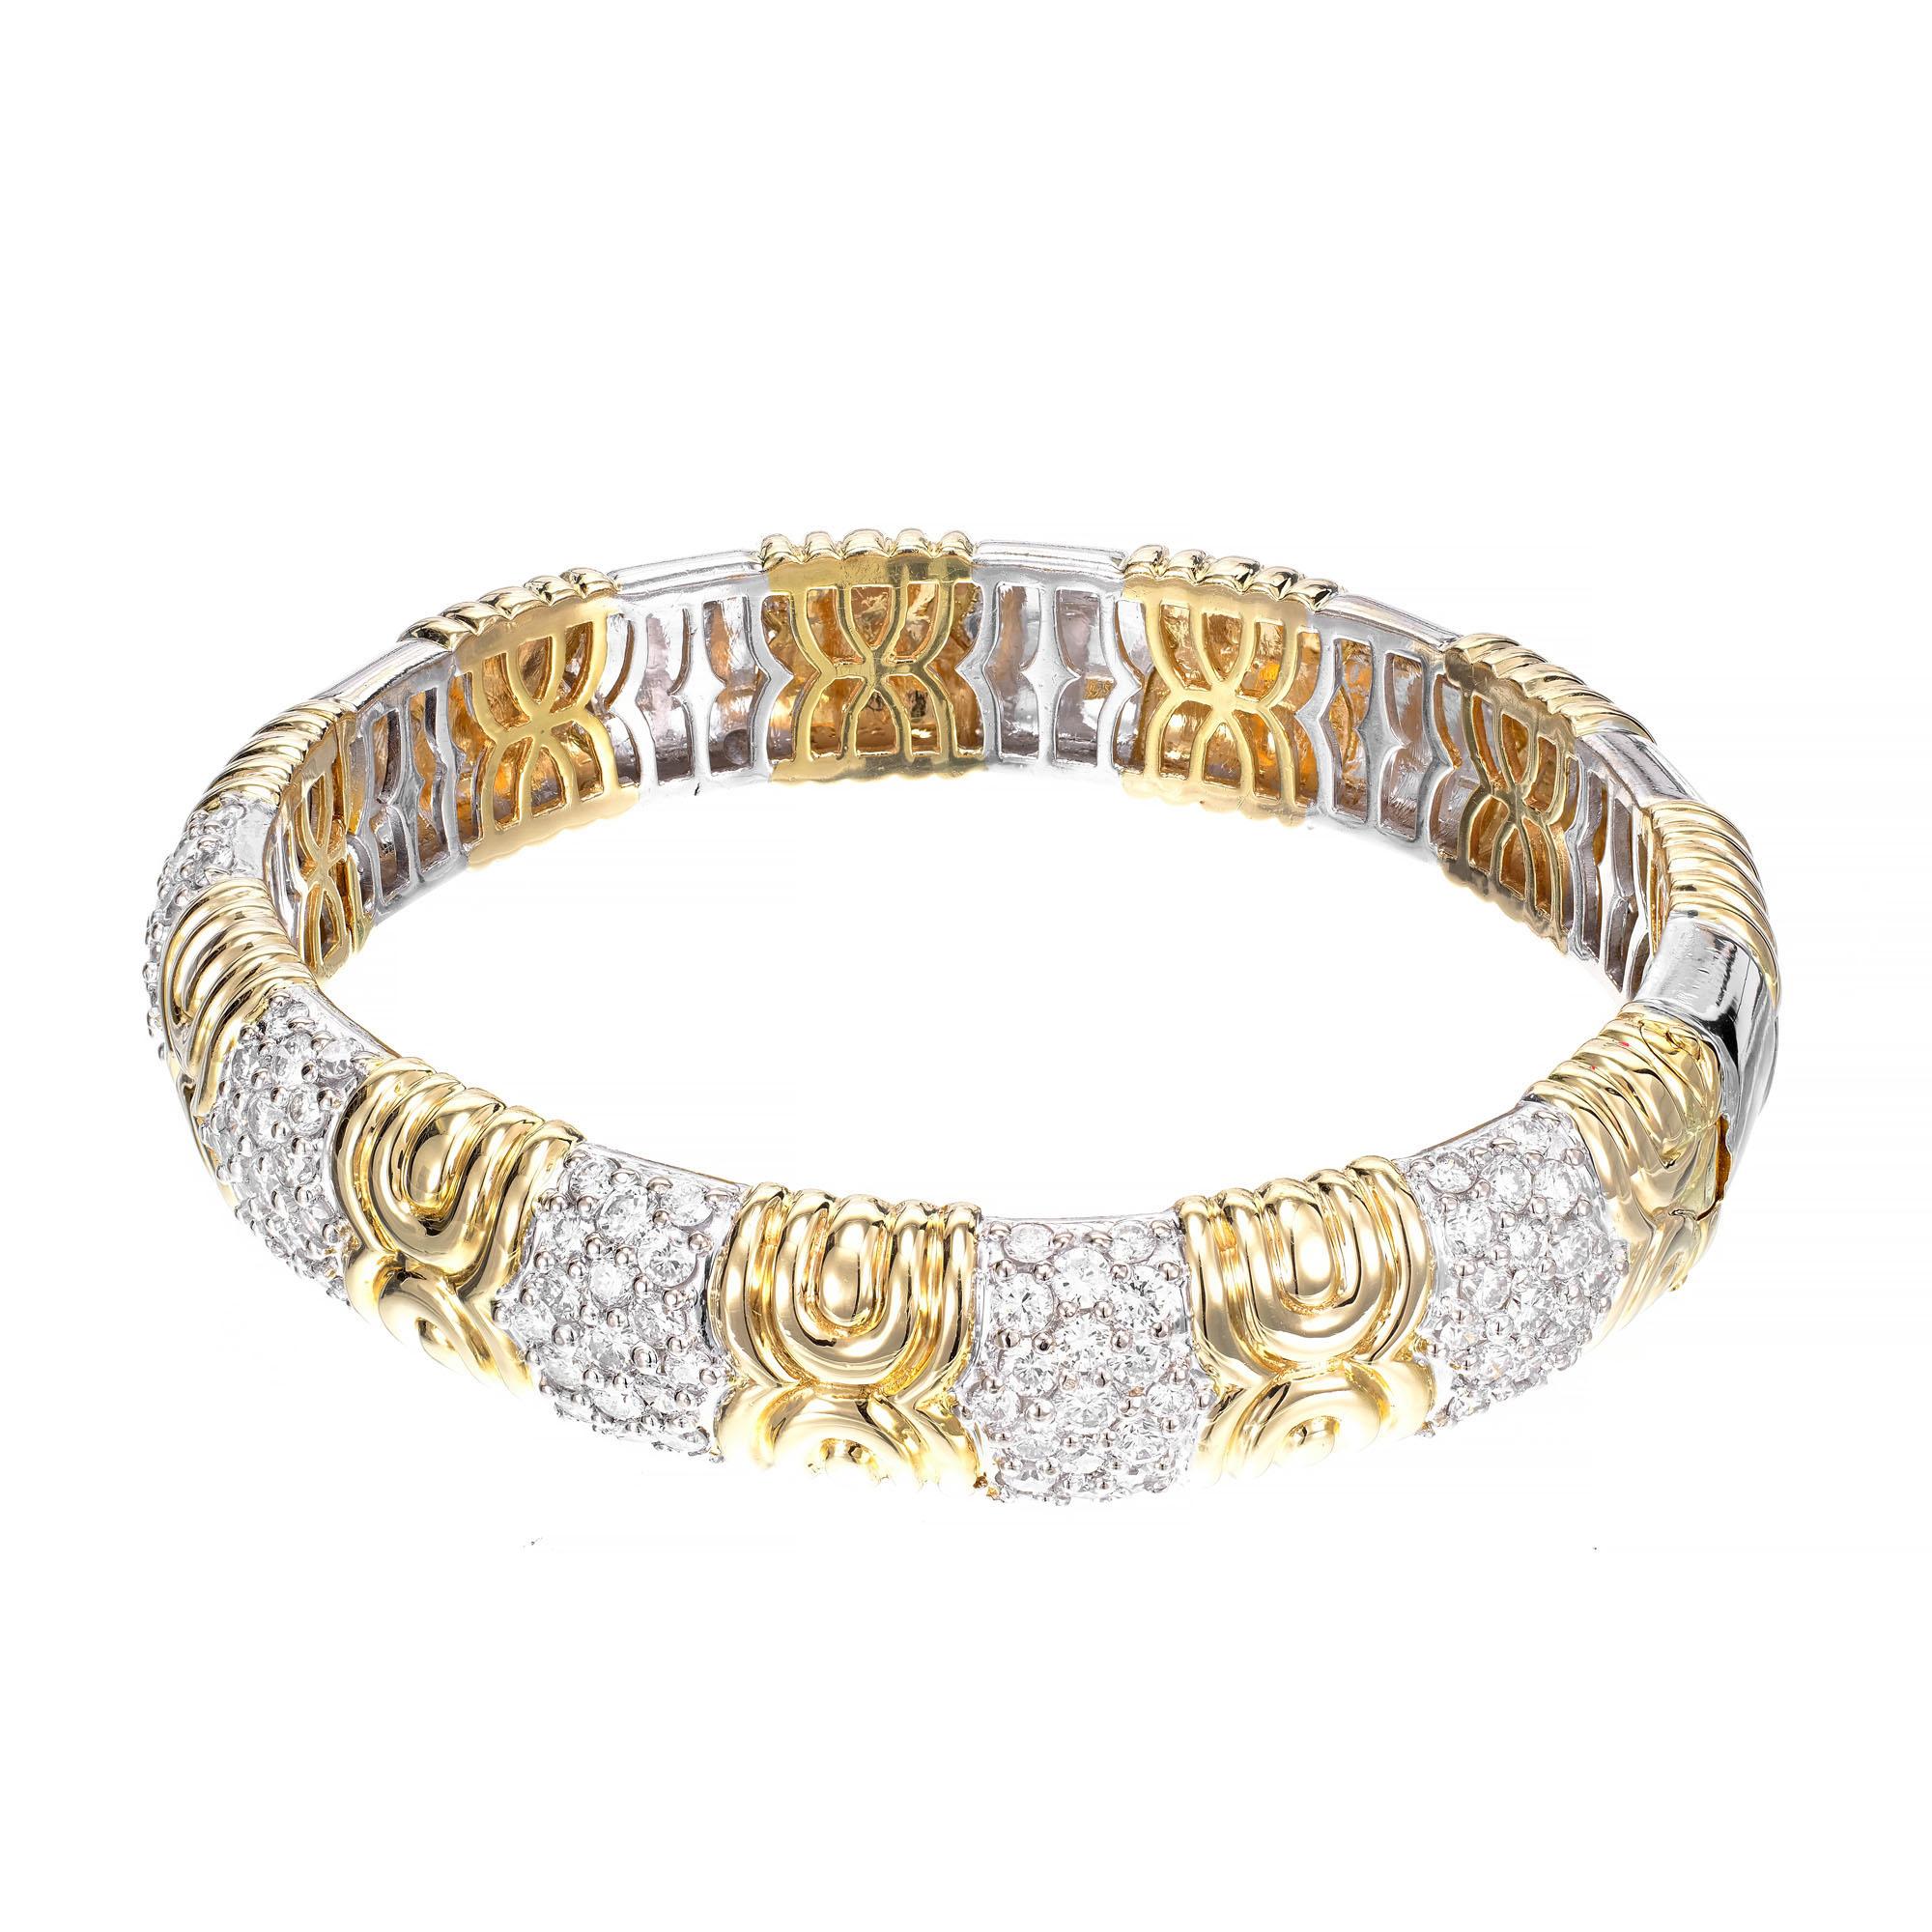 18k yellow and white gold bangle bracelet accented with 95 round brilliant cut diamonds.

95 round brilliant cut diamonds, G-H VS approx. 3.35cts
18k yellow gold 
18k white gold 
Stamped: 750
53.4 grams
Width: 12.6mm 
Thickness/depth: 5.7mm
Inside